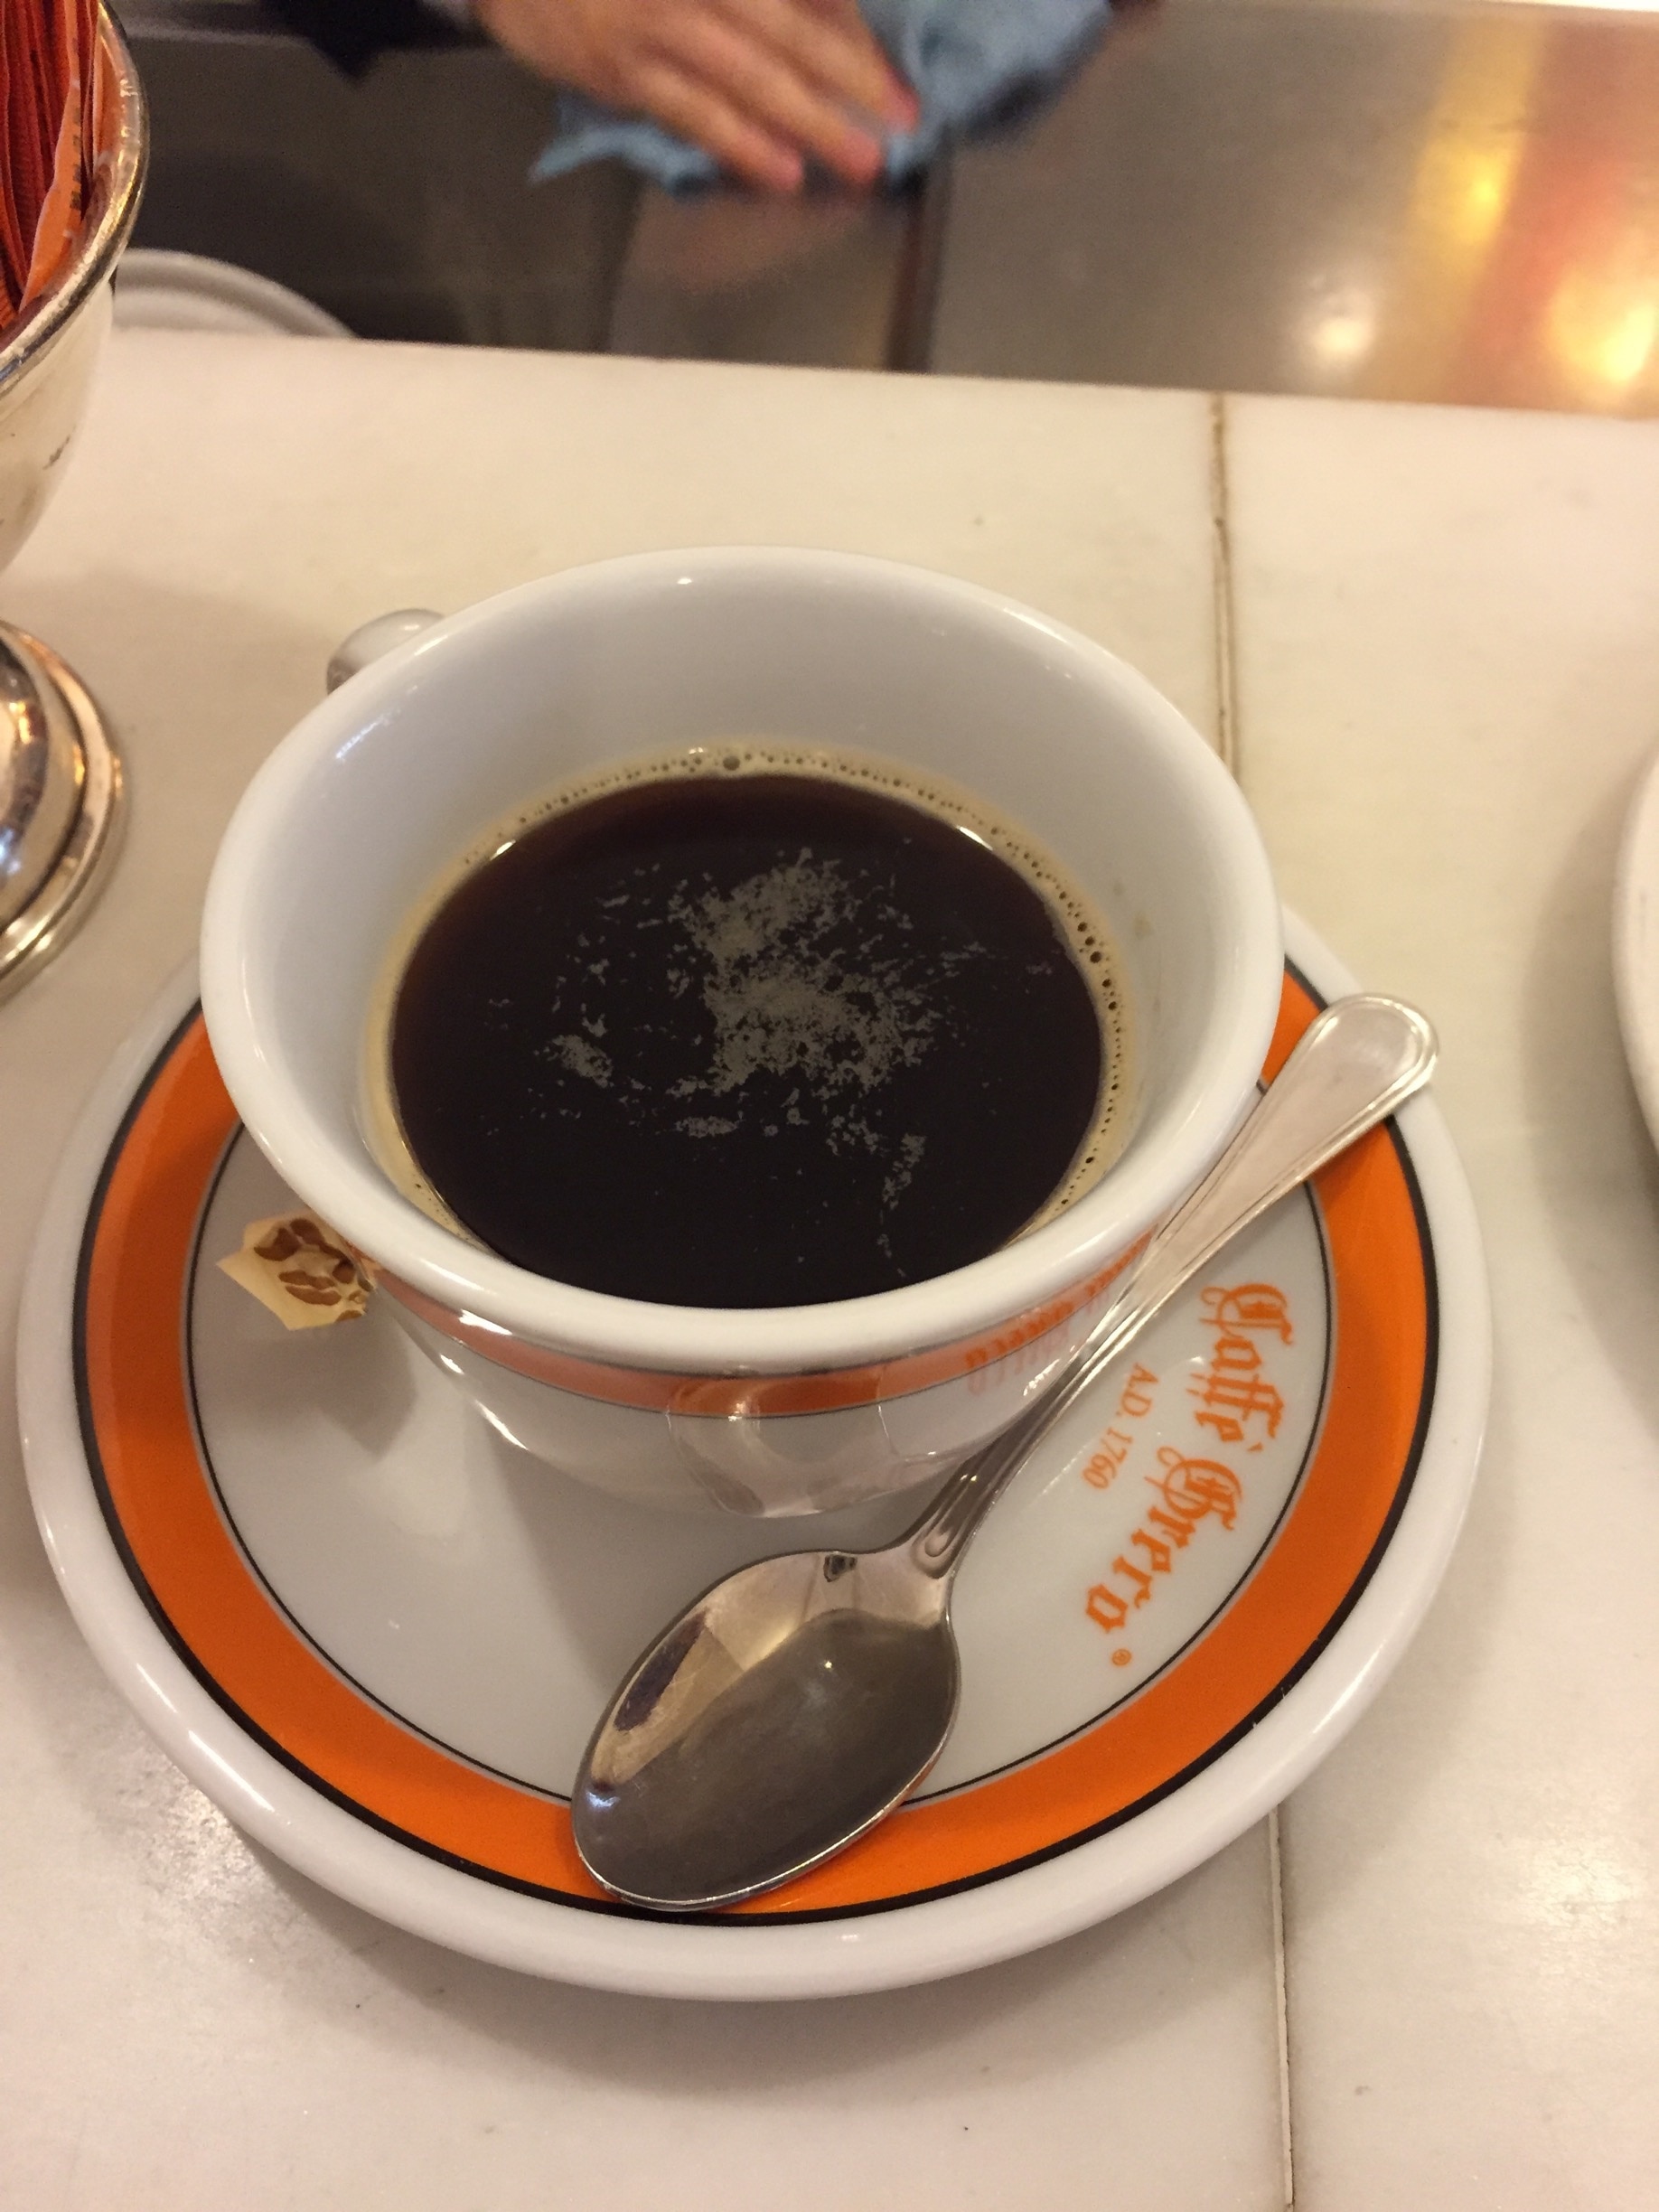 Rome's best coffee experience